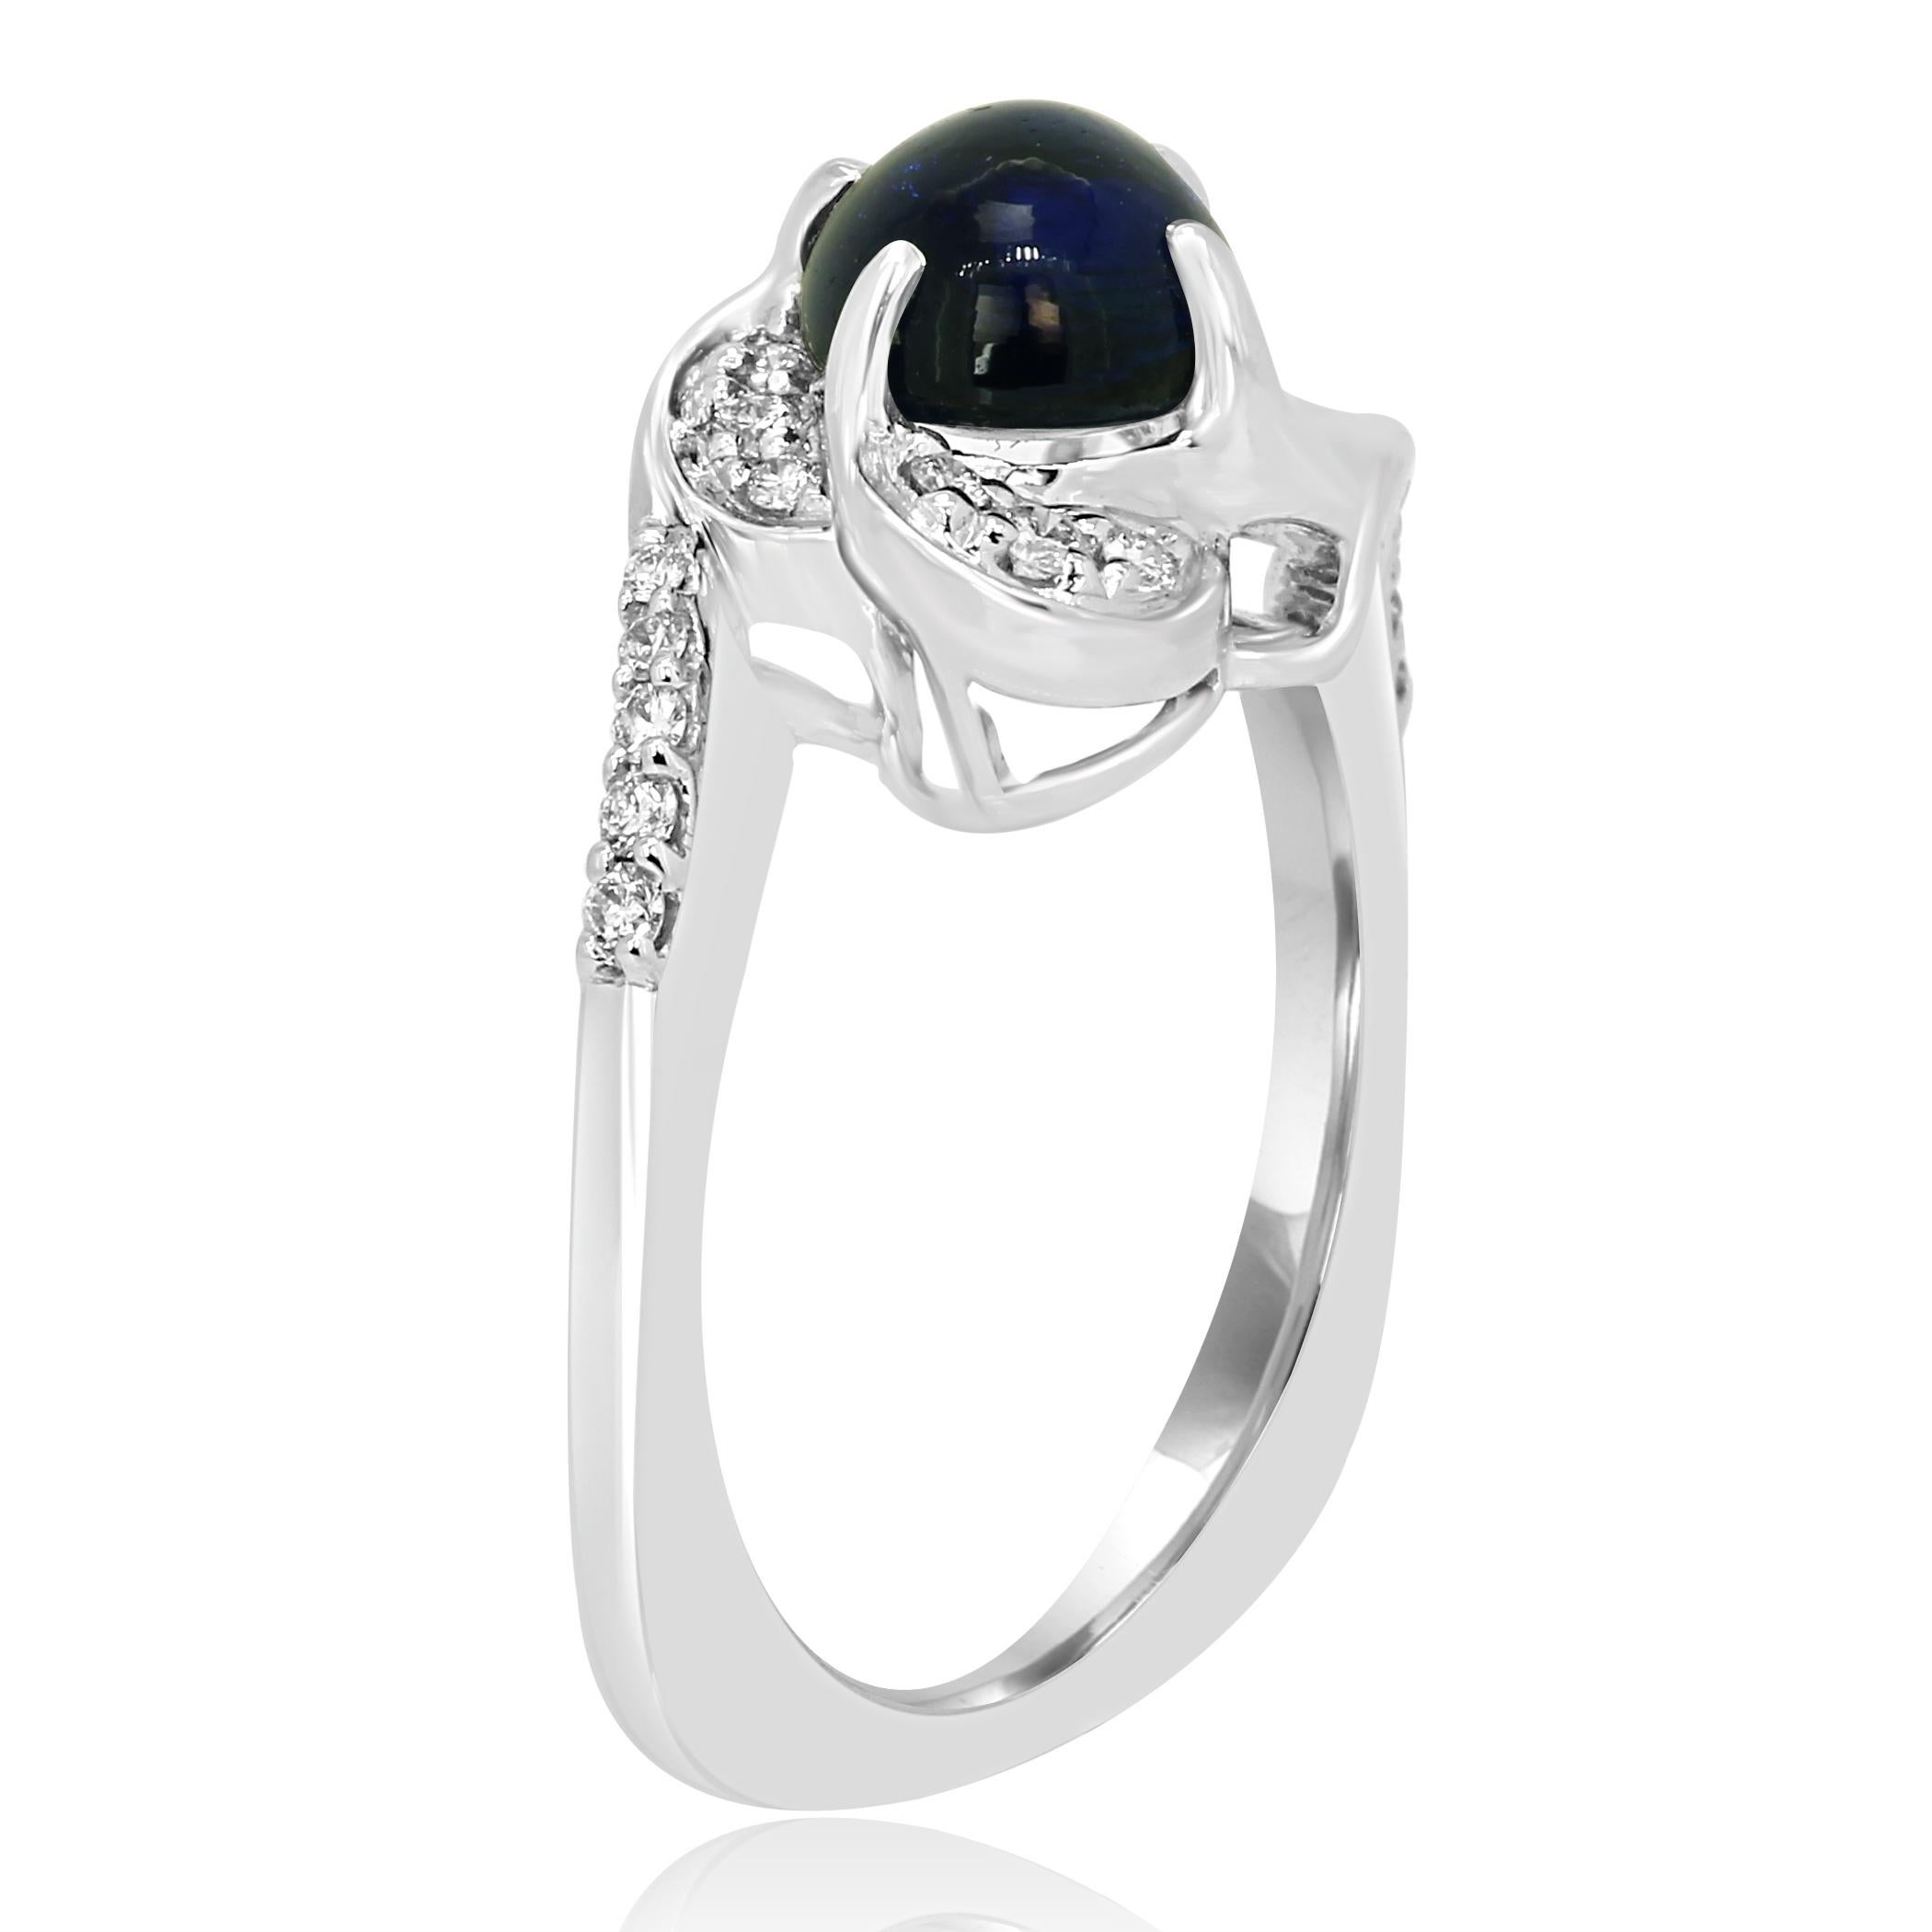 Oval Cut GIA Certified 3.04 Carat Blue Sapphire Cabochon Diamond Halo Gold Cocktail Ring